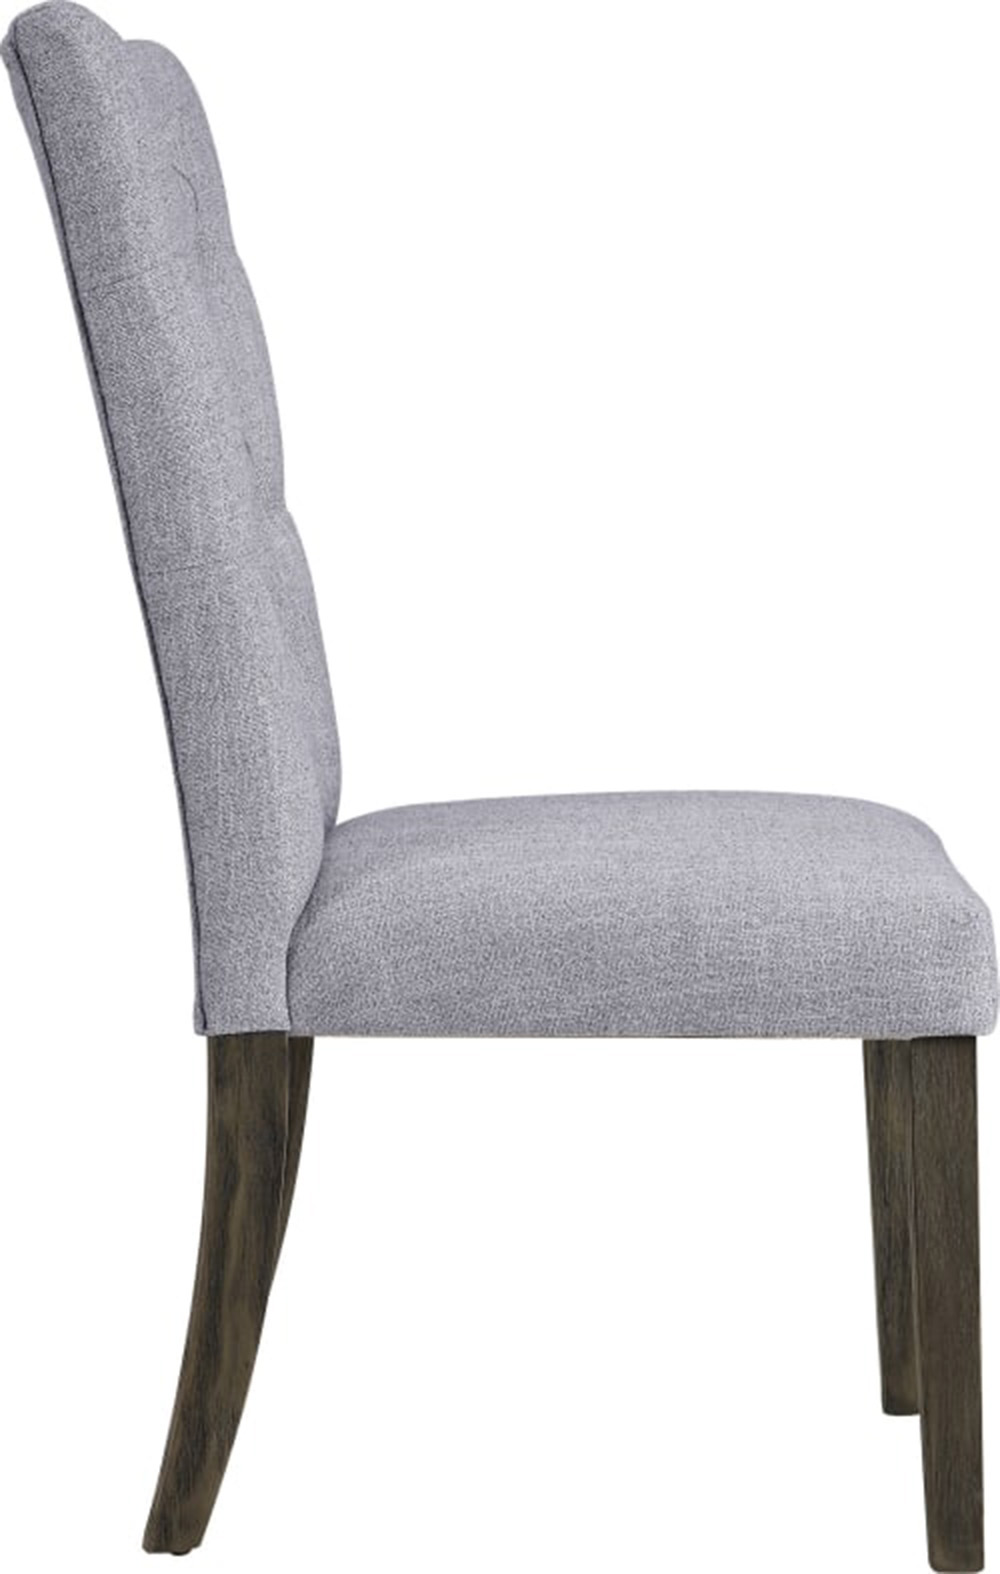 ACME Merel Fabric Upholstered Dining Chair Set of 2, with Button Tufted Backrest, and Wood Legs, for Restaurant, Cafe, Tavern, Office, Living Room - Gray